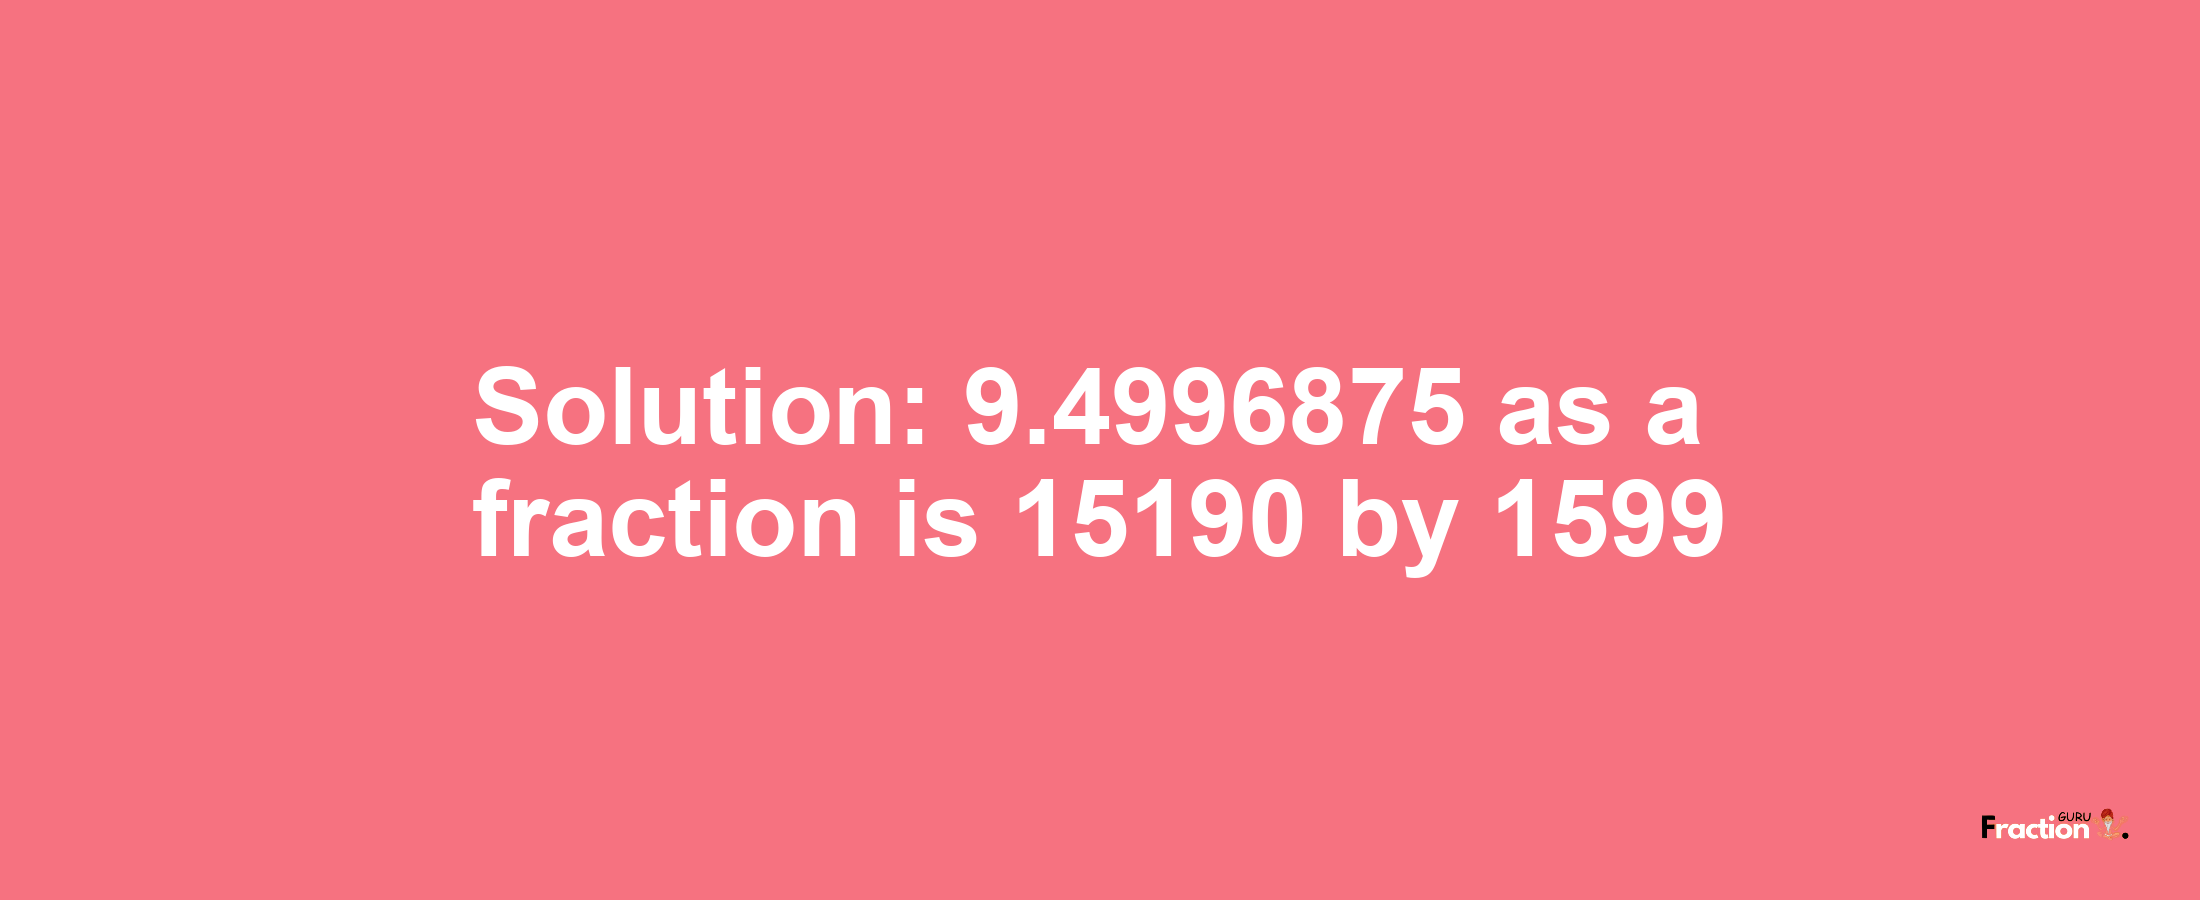 Solution:9.4996875 as a fraction is 15190/1599